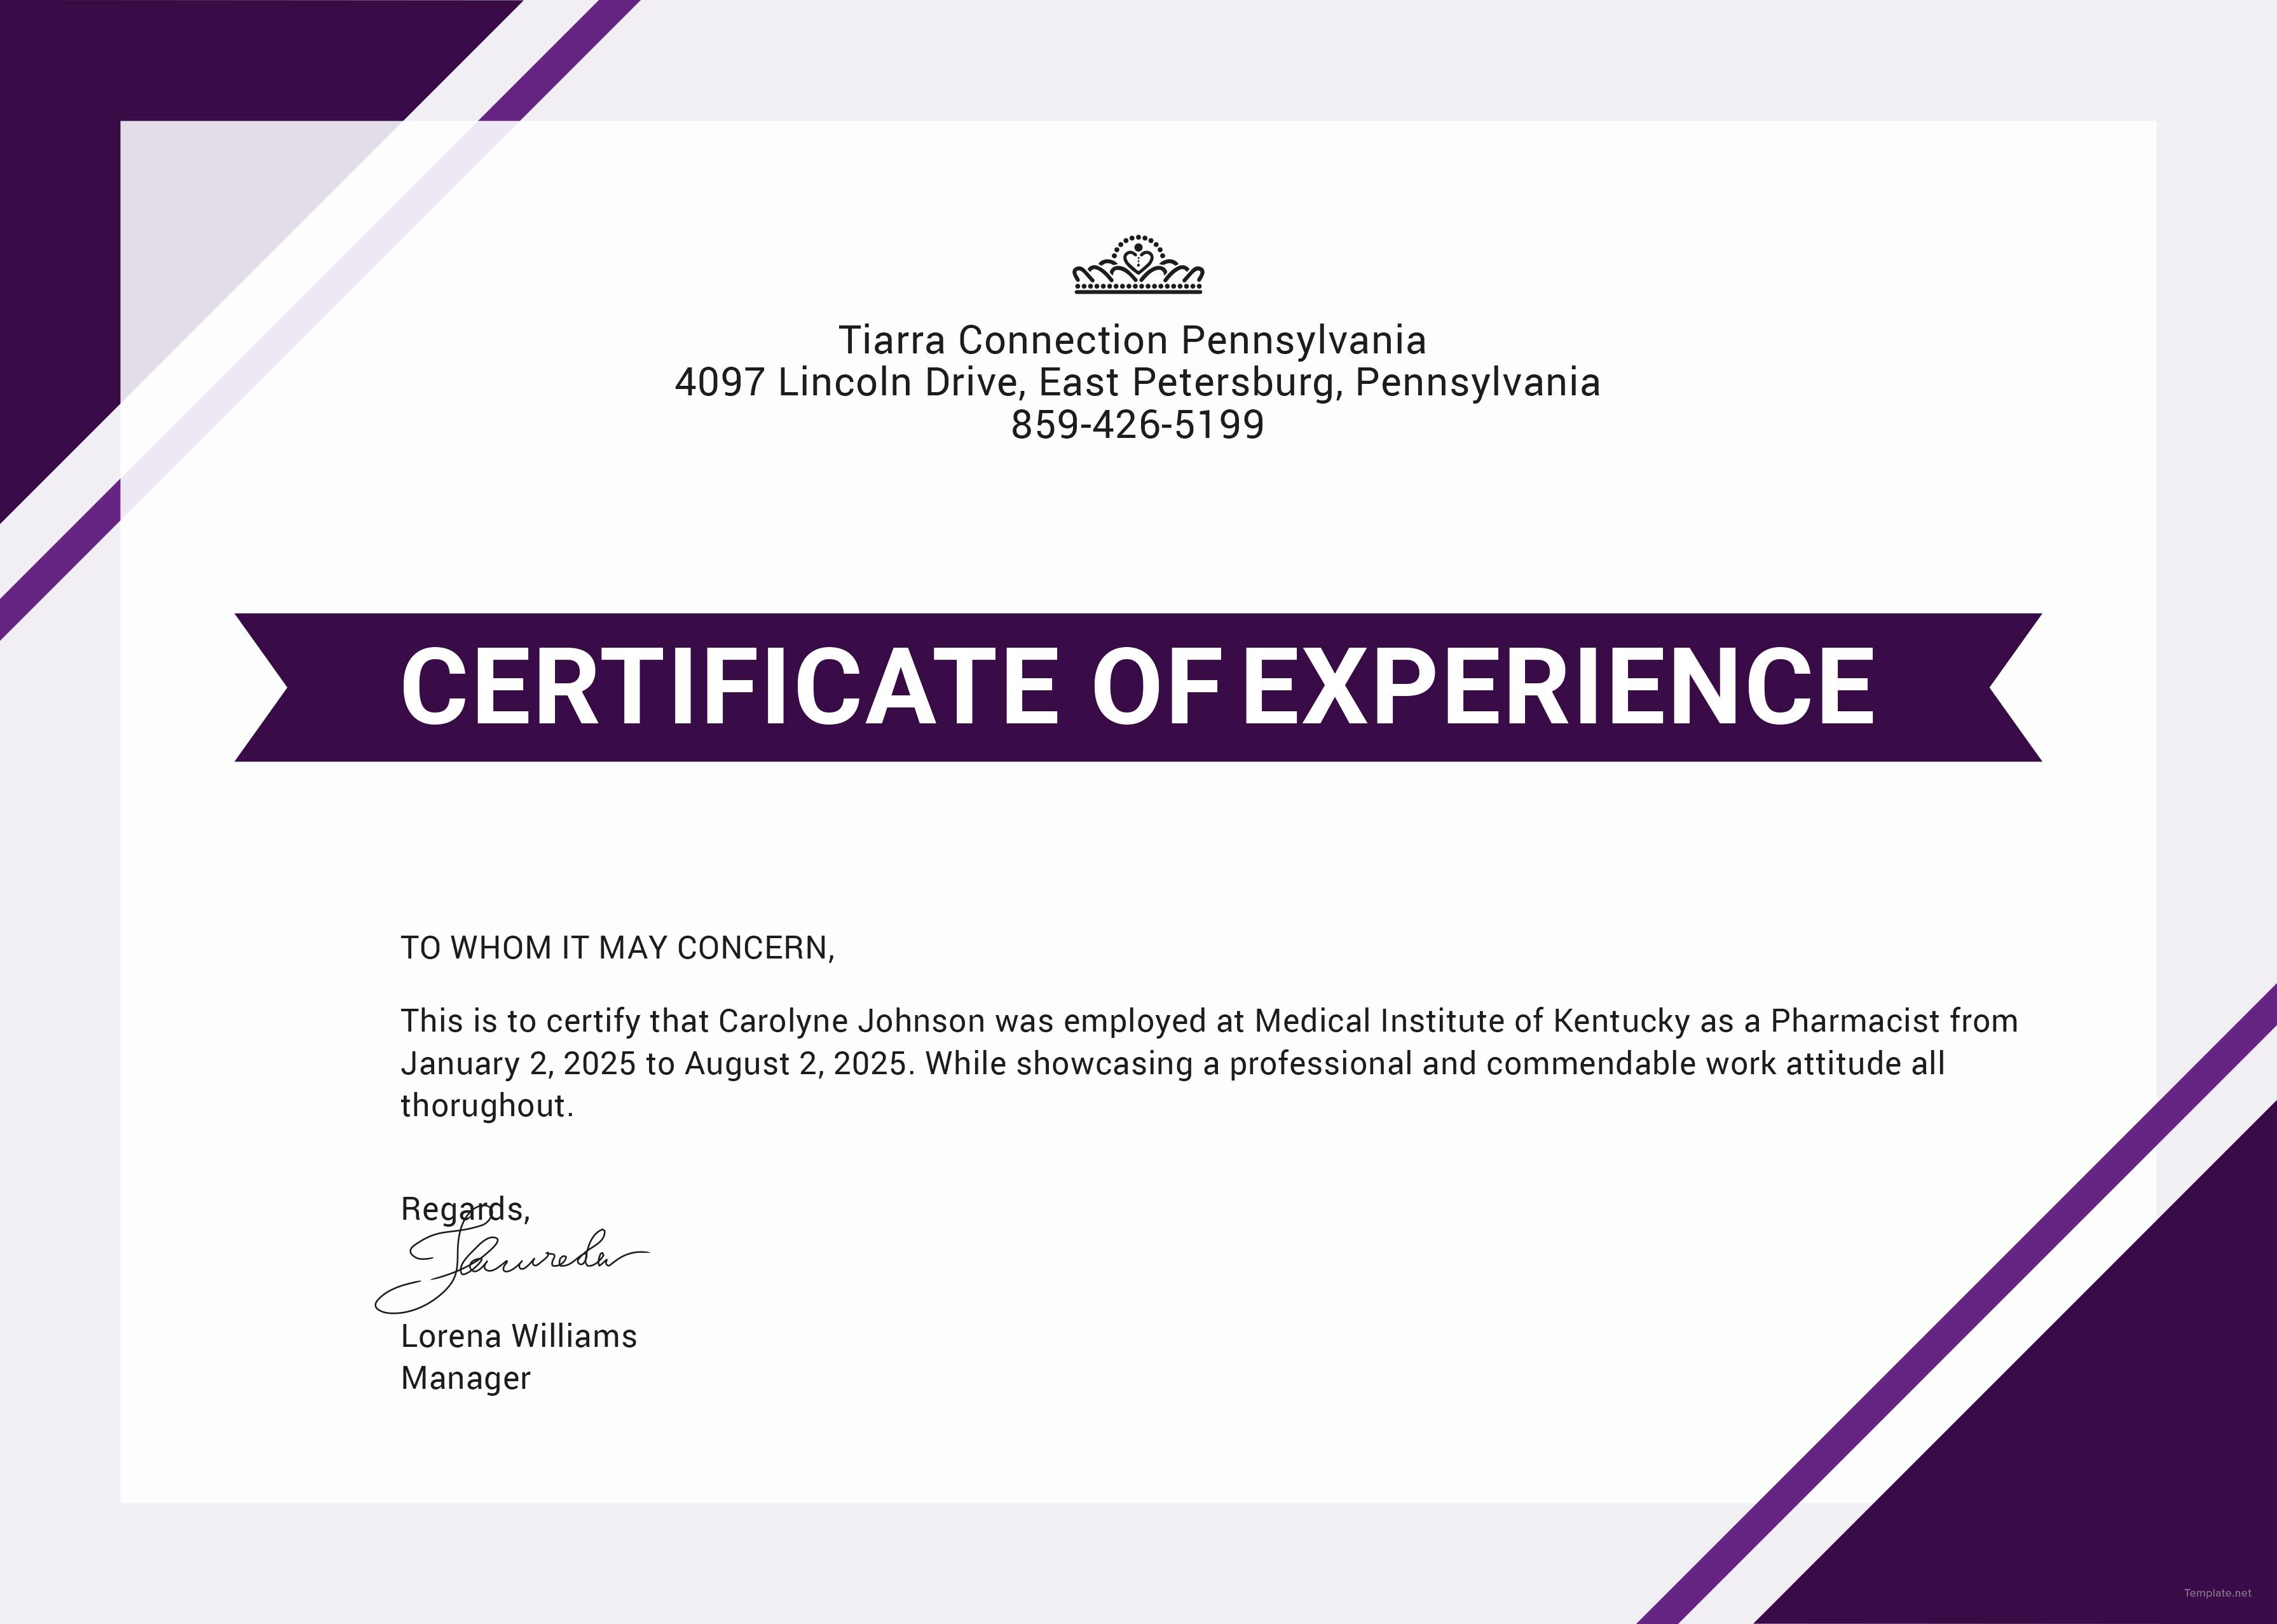 ❤️Free Printable Certificate of Experience Sample Template❤️ For Certificate Of Experience Template